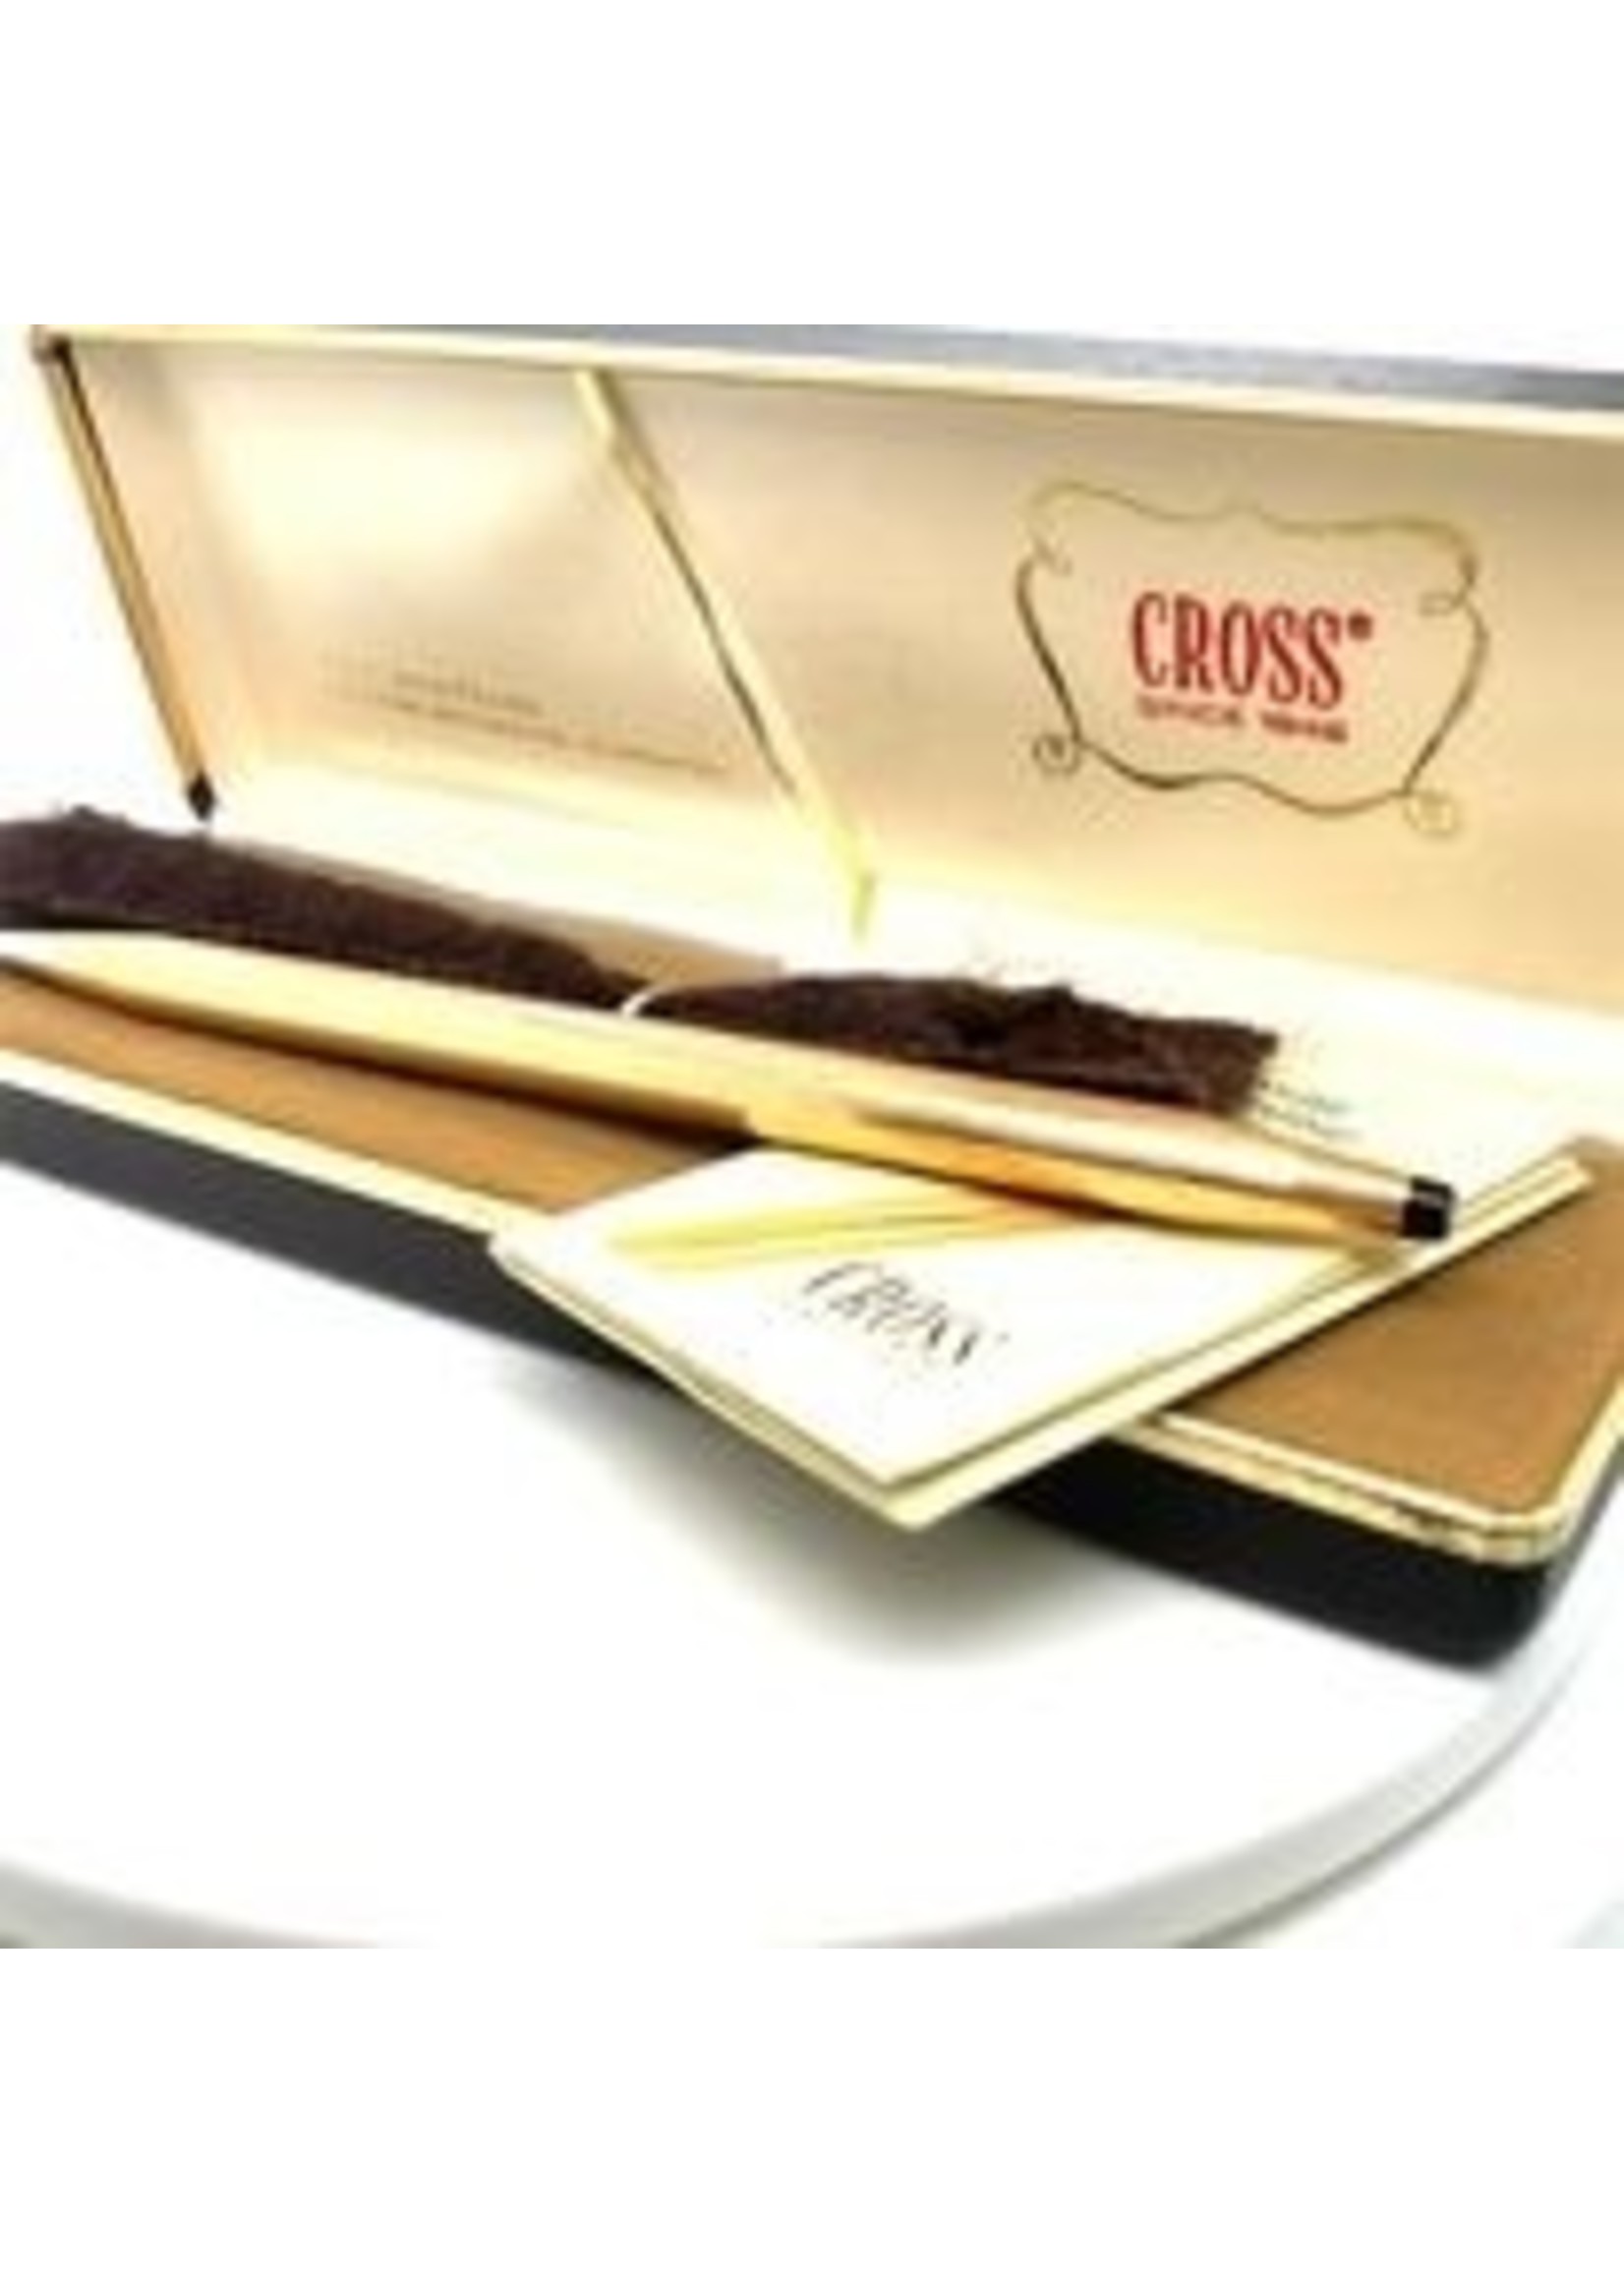 Vintage & Occasion Occasion Cross Classic pen 14k goldfilled